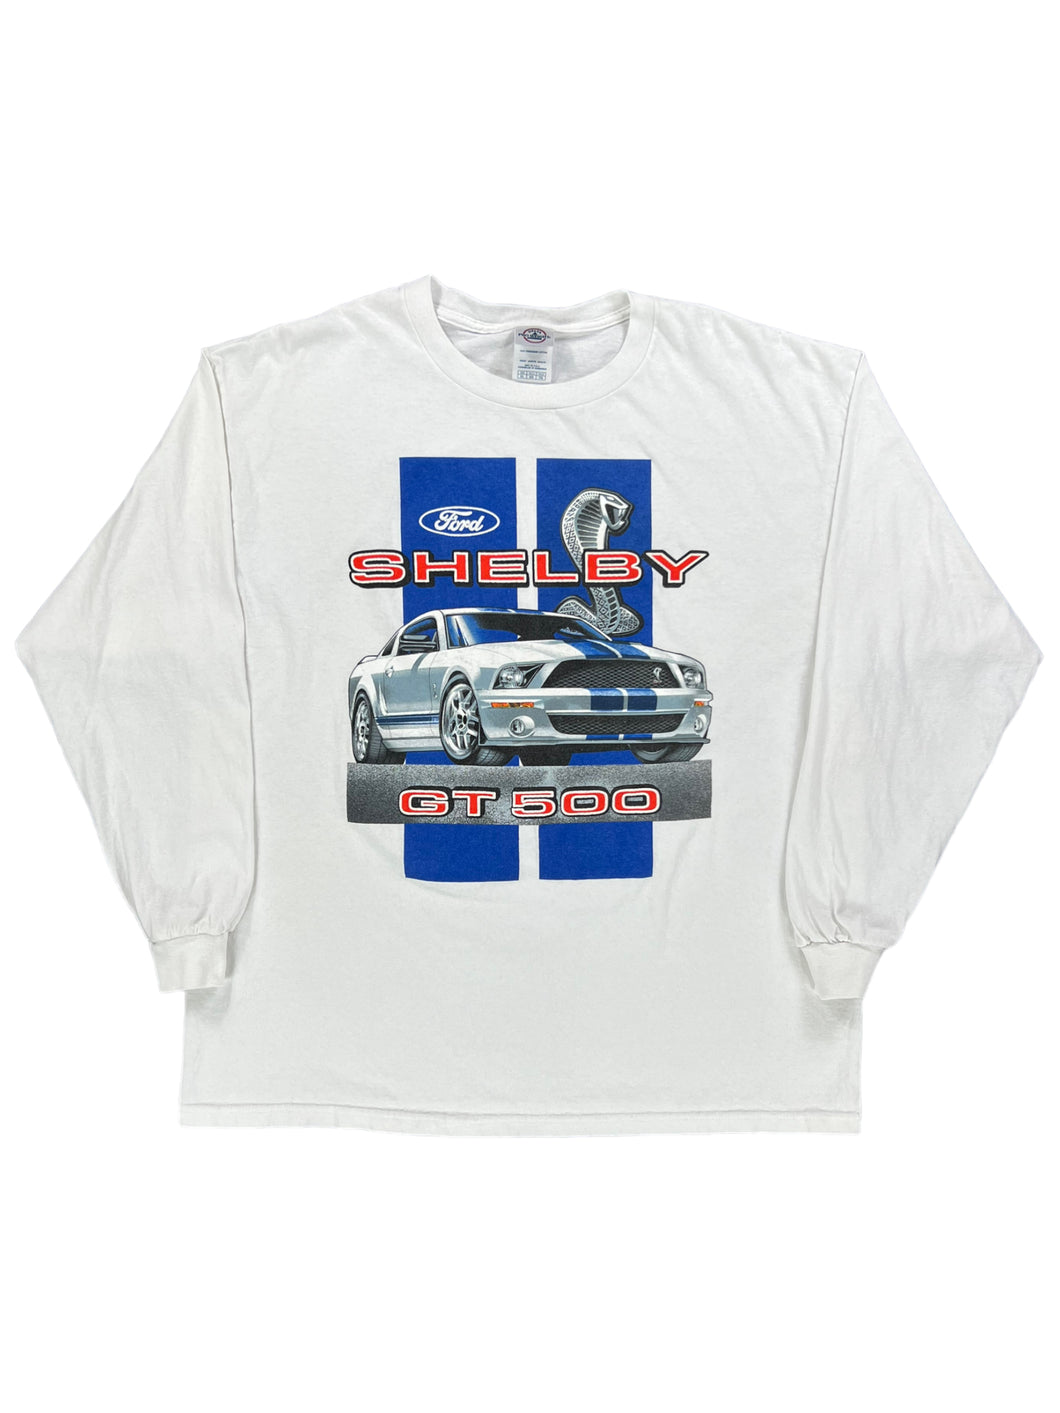 Vintage Y2K Ford Shelby GT 500 muscle car long sleeve tee (XL)